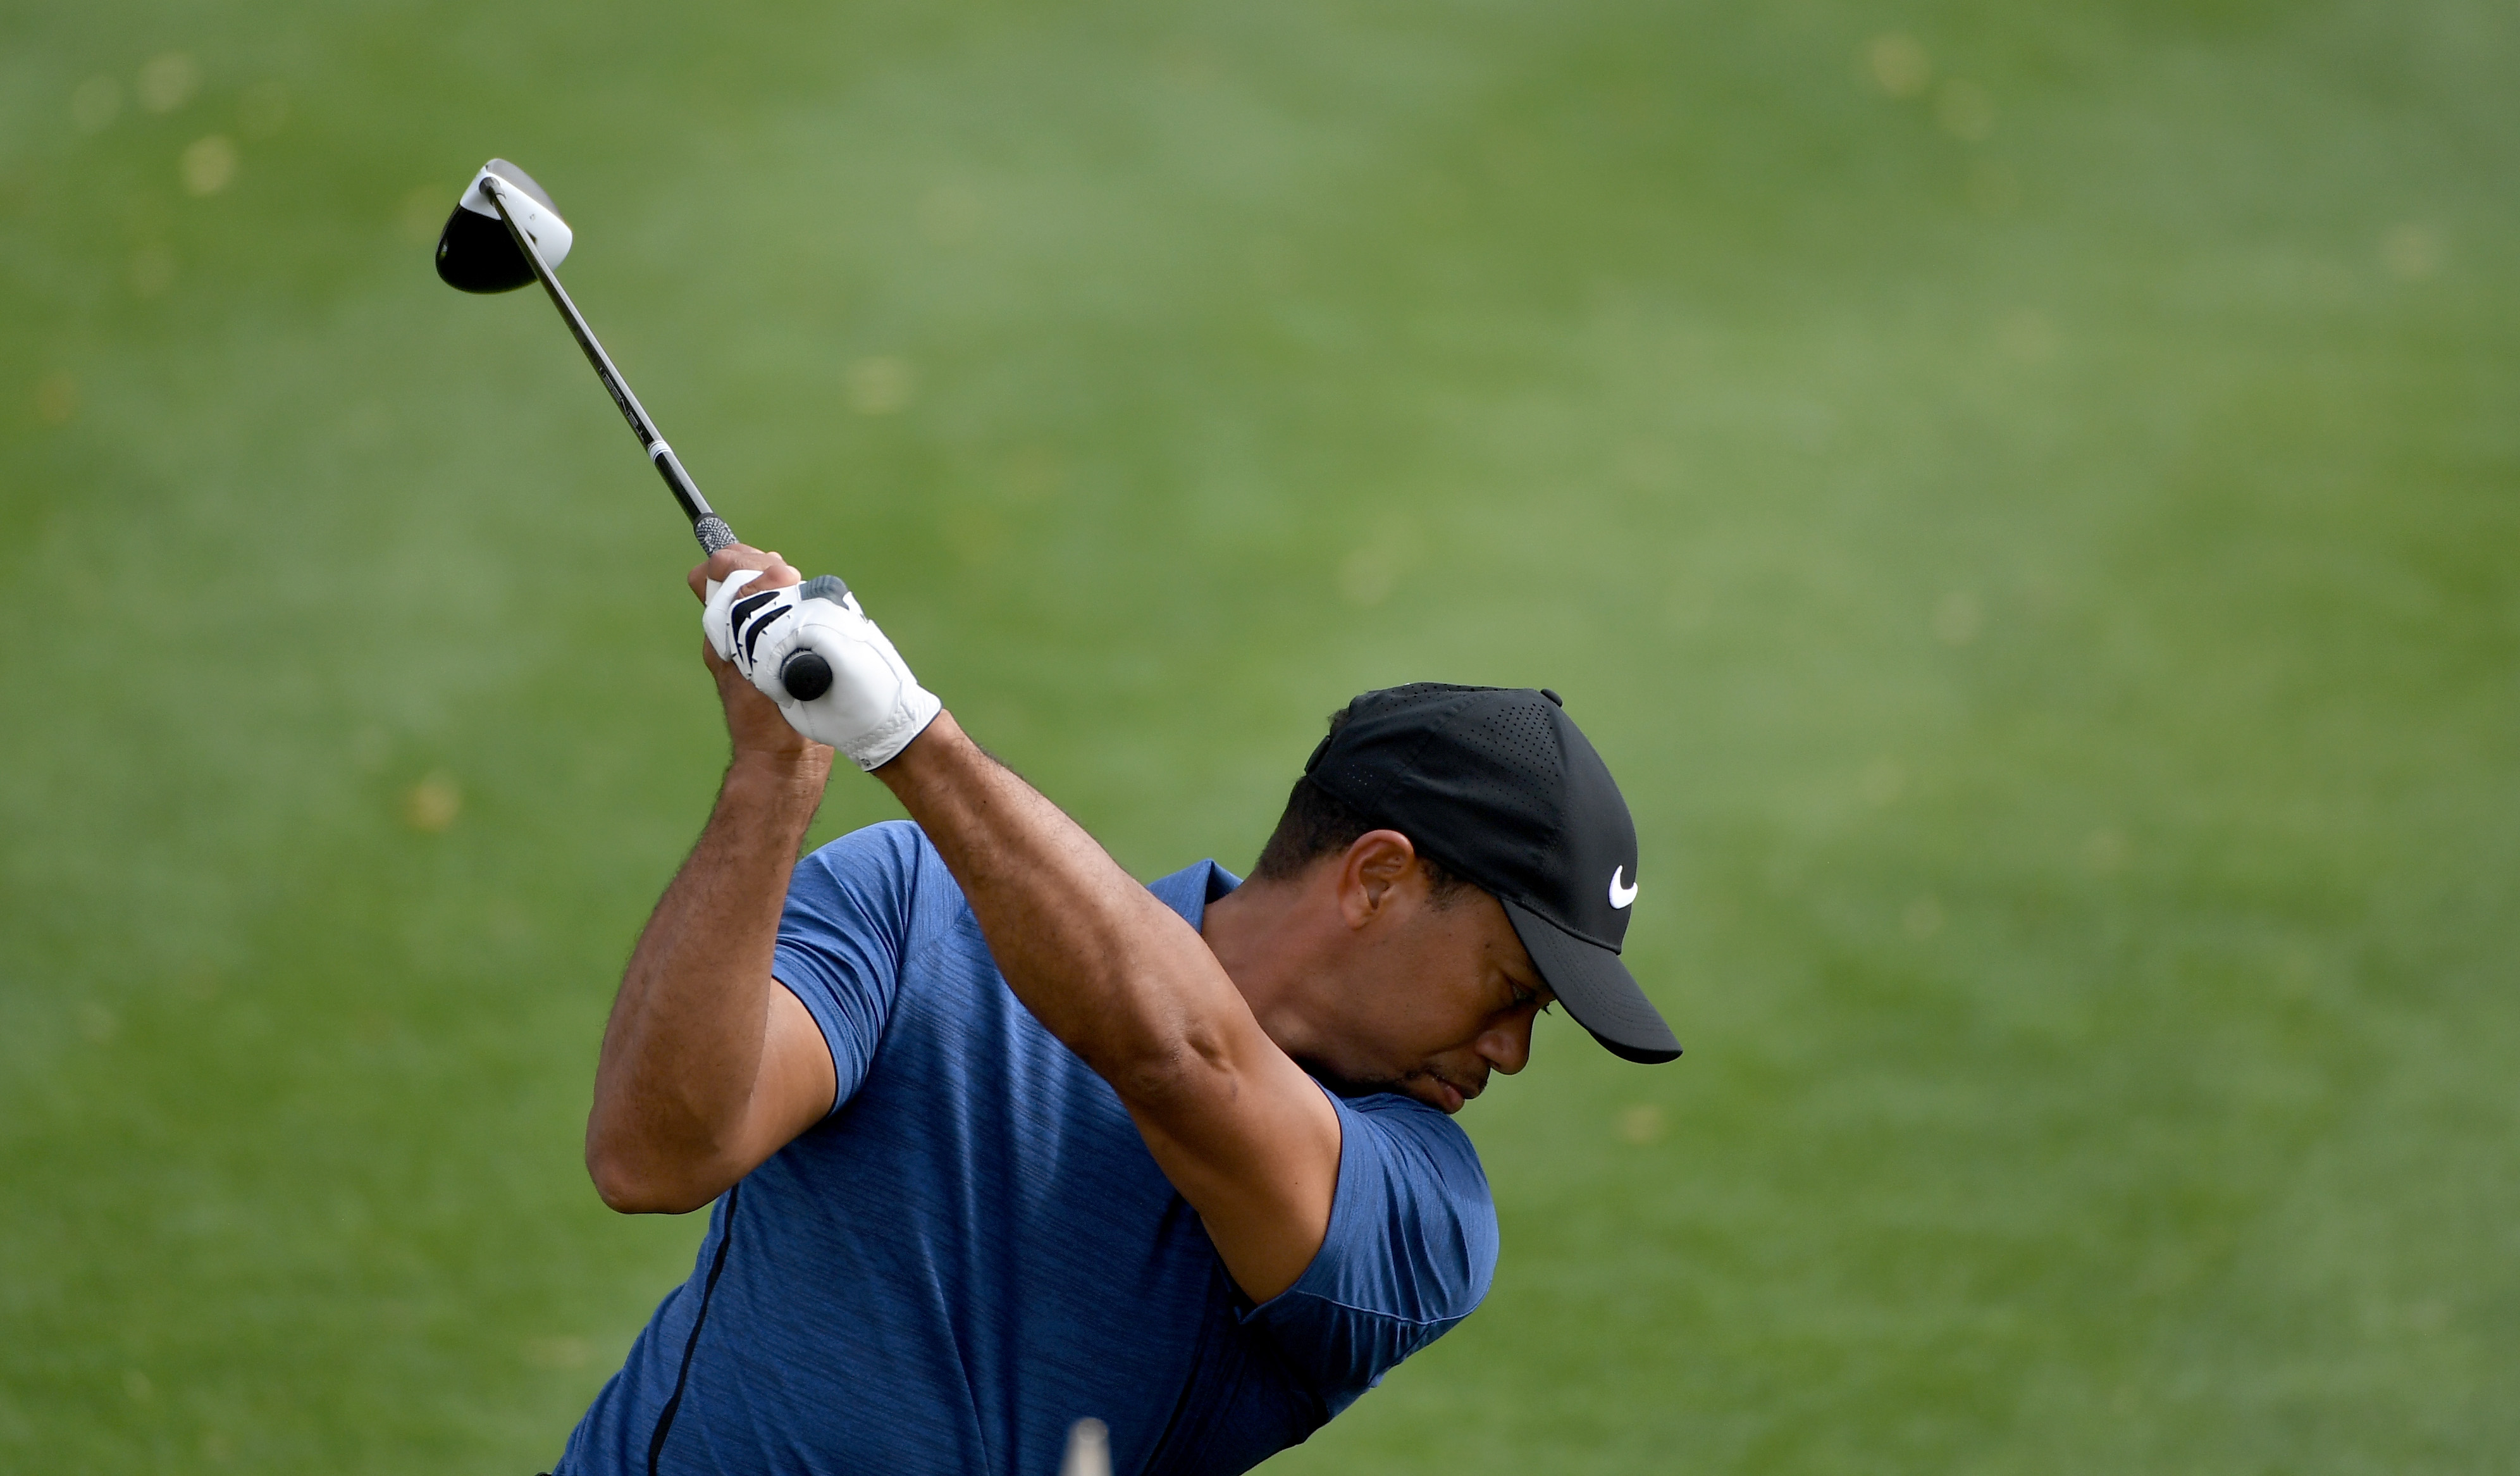 Tiger Woods: I can't go back to my 2000 swing, so stop asking me to please